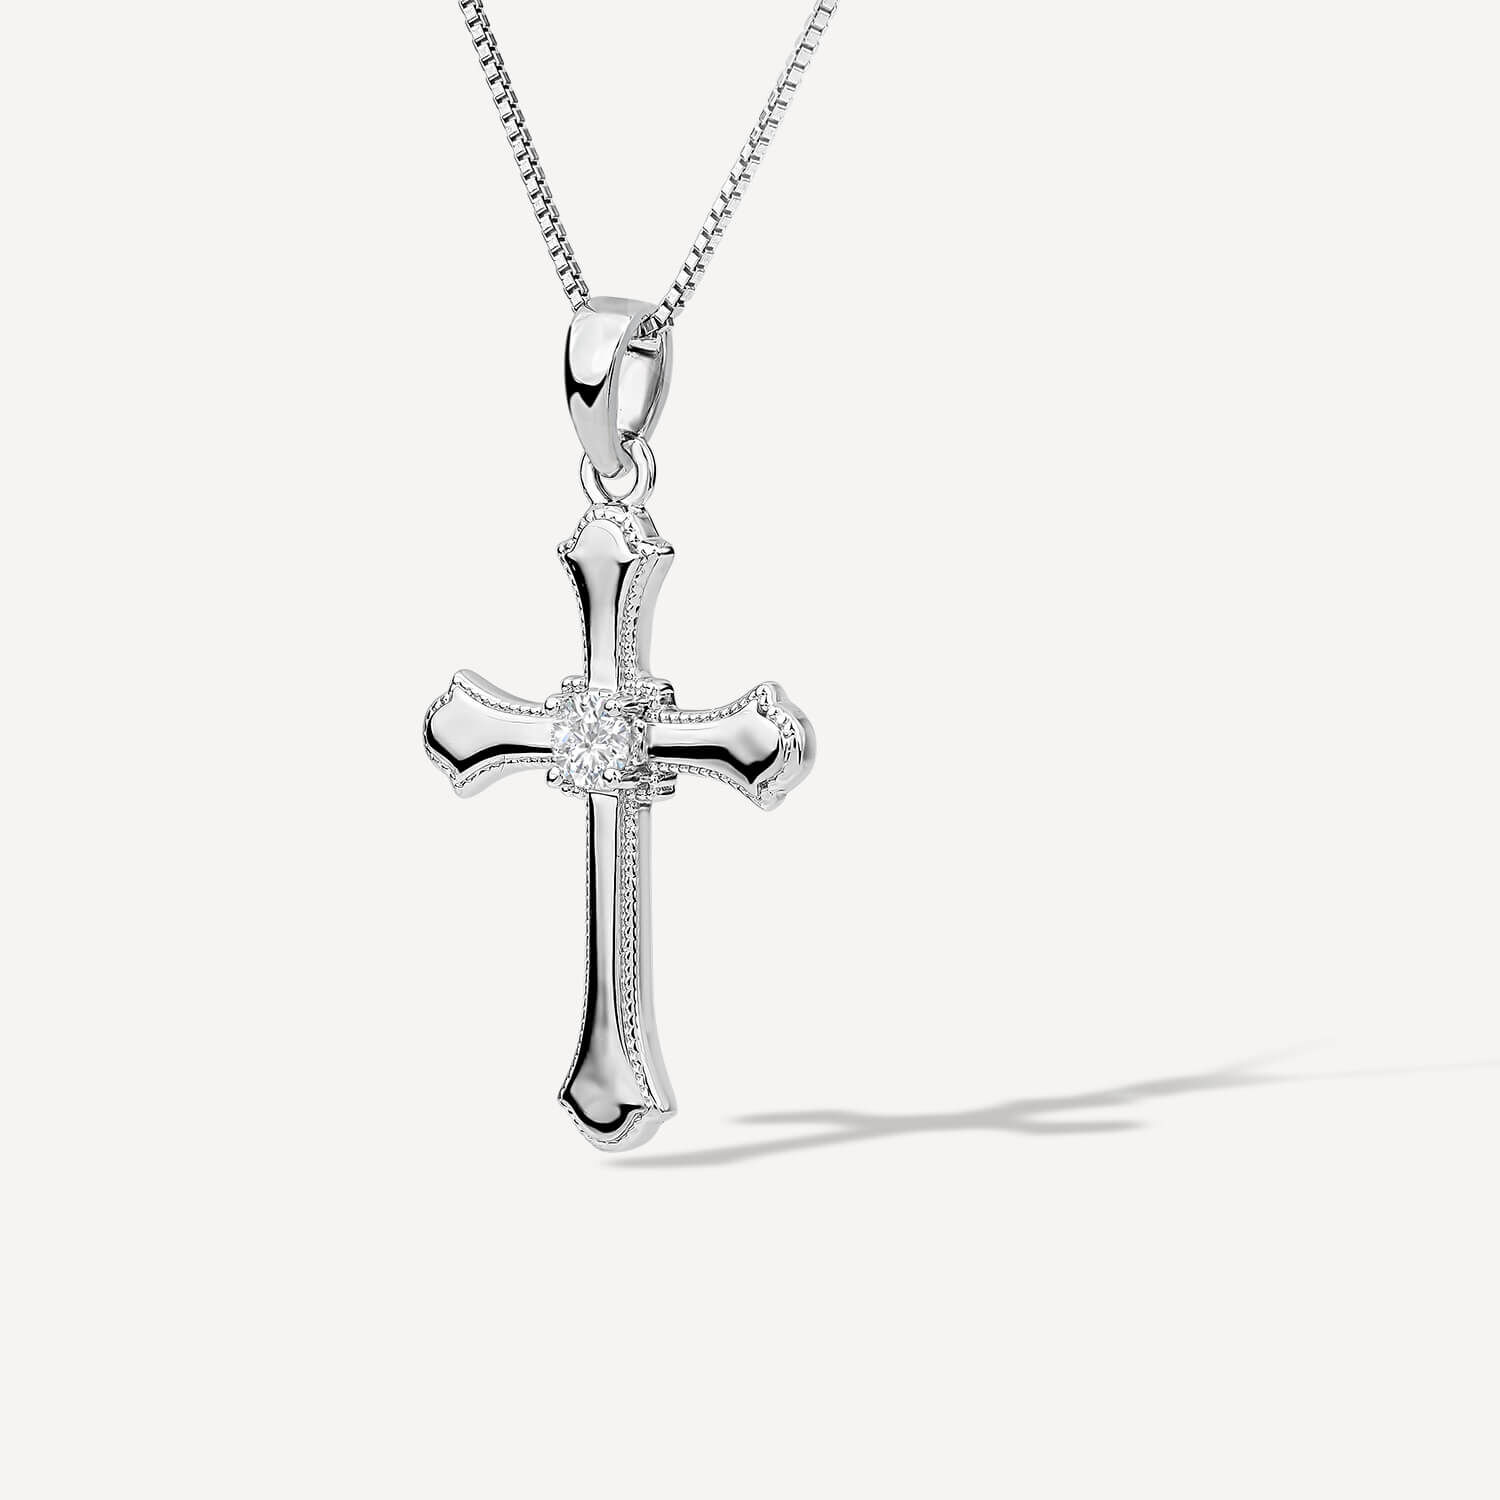 14K White Gold Crucifix Cross Charm Pendant with 14K White Gold Rope  Necklace, Diamond Cut Fine Jewelry, Great Gift for Men & Women for Any  Occasion 20